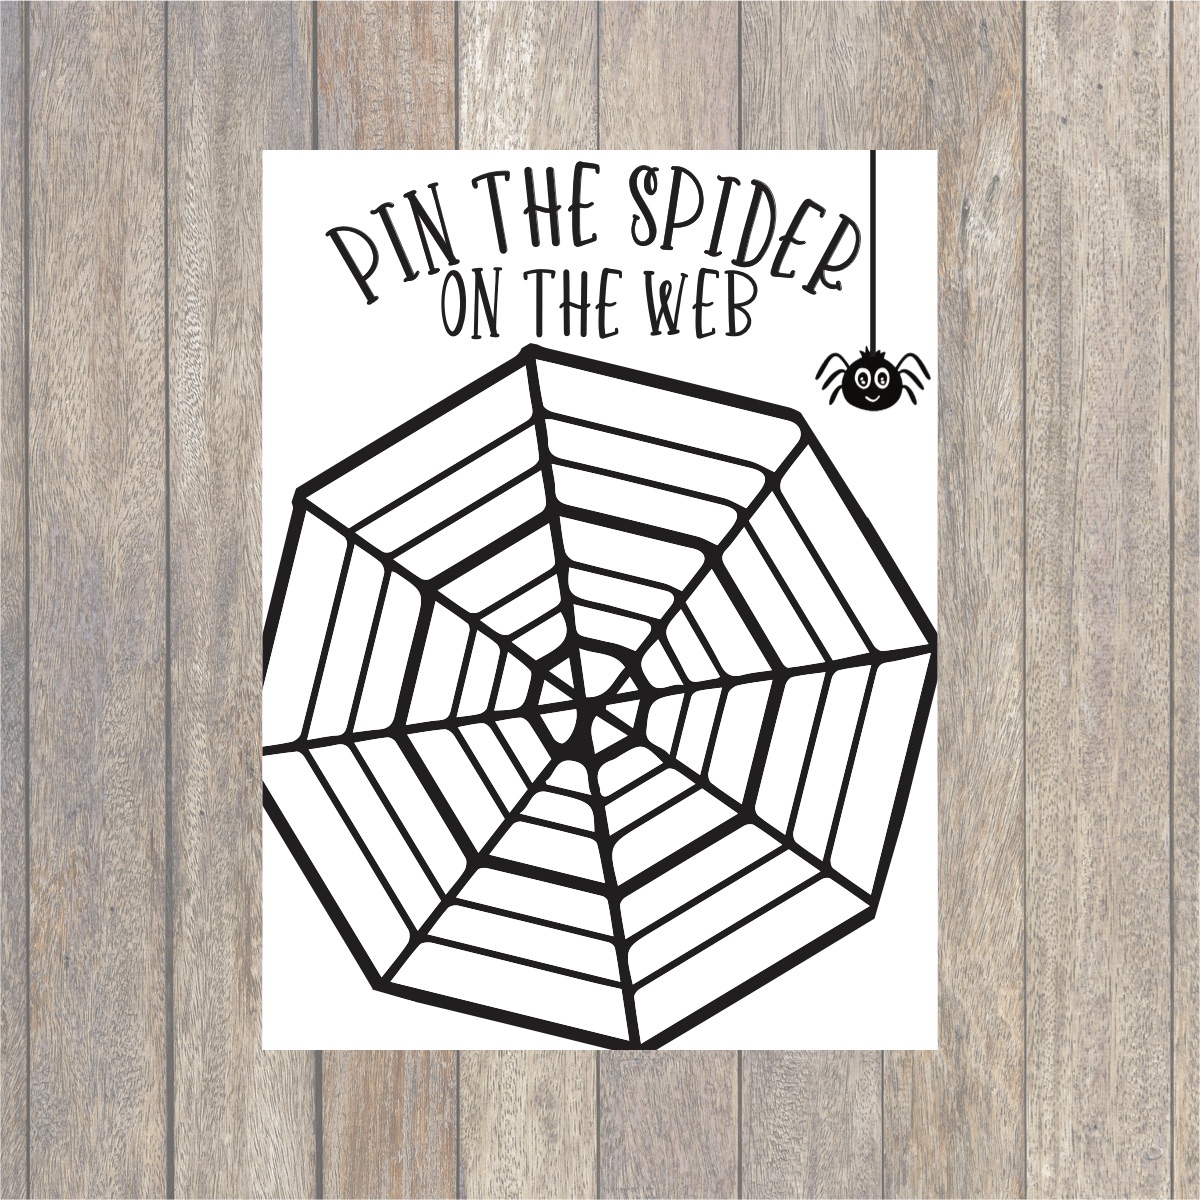 Details about   Halloween Pin The Spider on The Web Game for Kids Halloween Party Favors and 